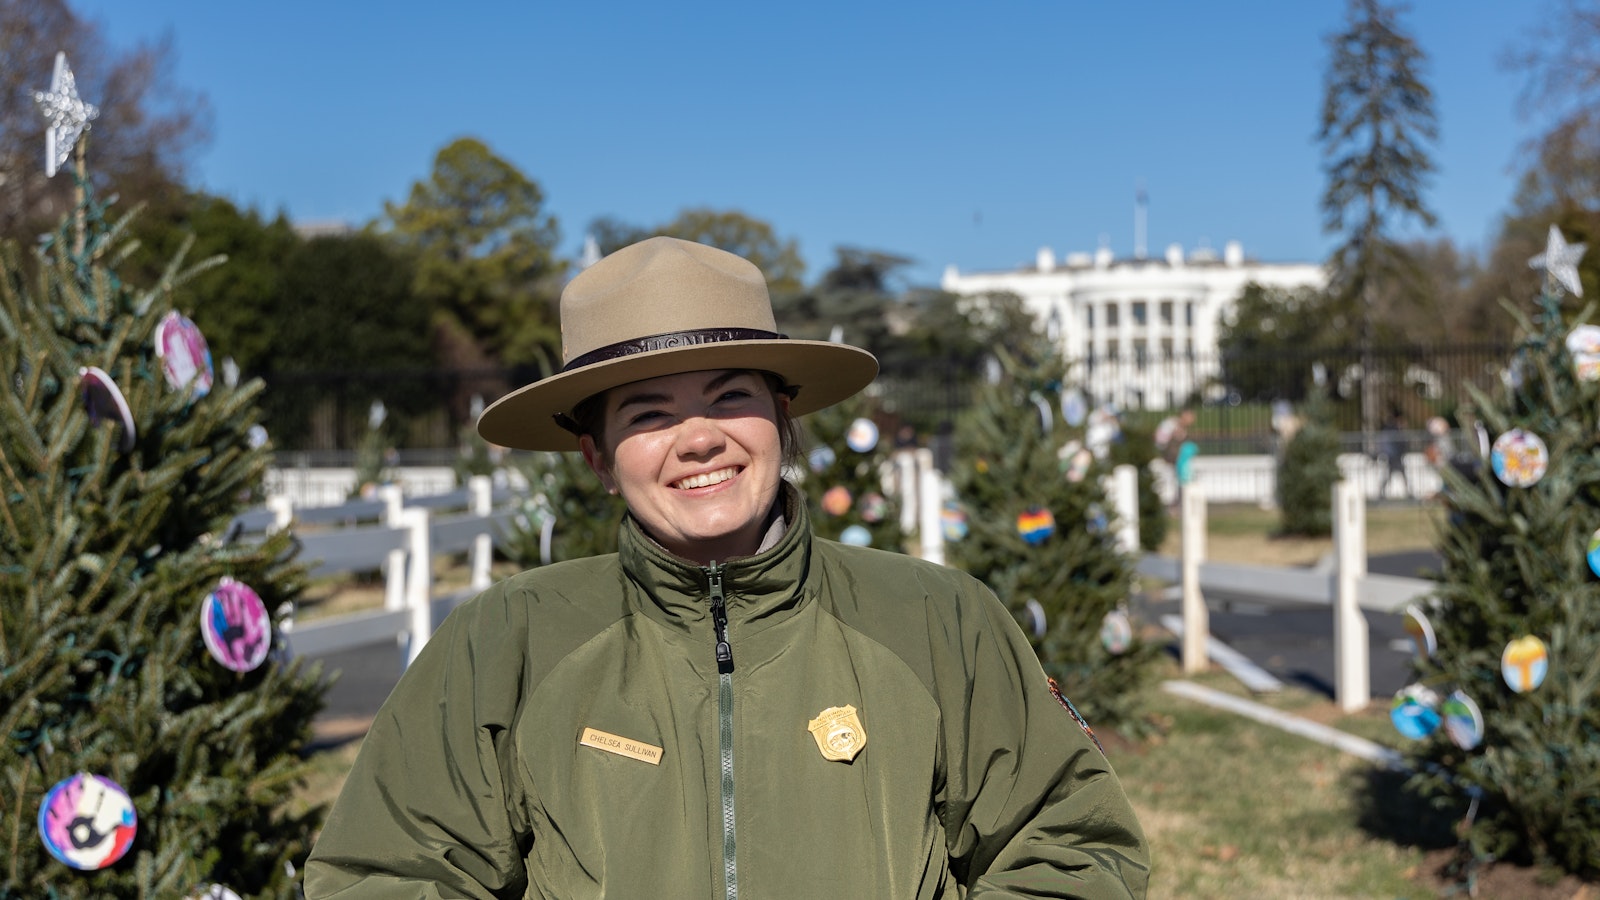 A Park Ranger stands in front of the decorated Christmas trees for the 2022 National Christmas Tree Lighting.